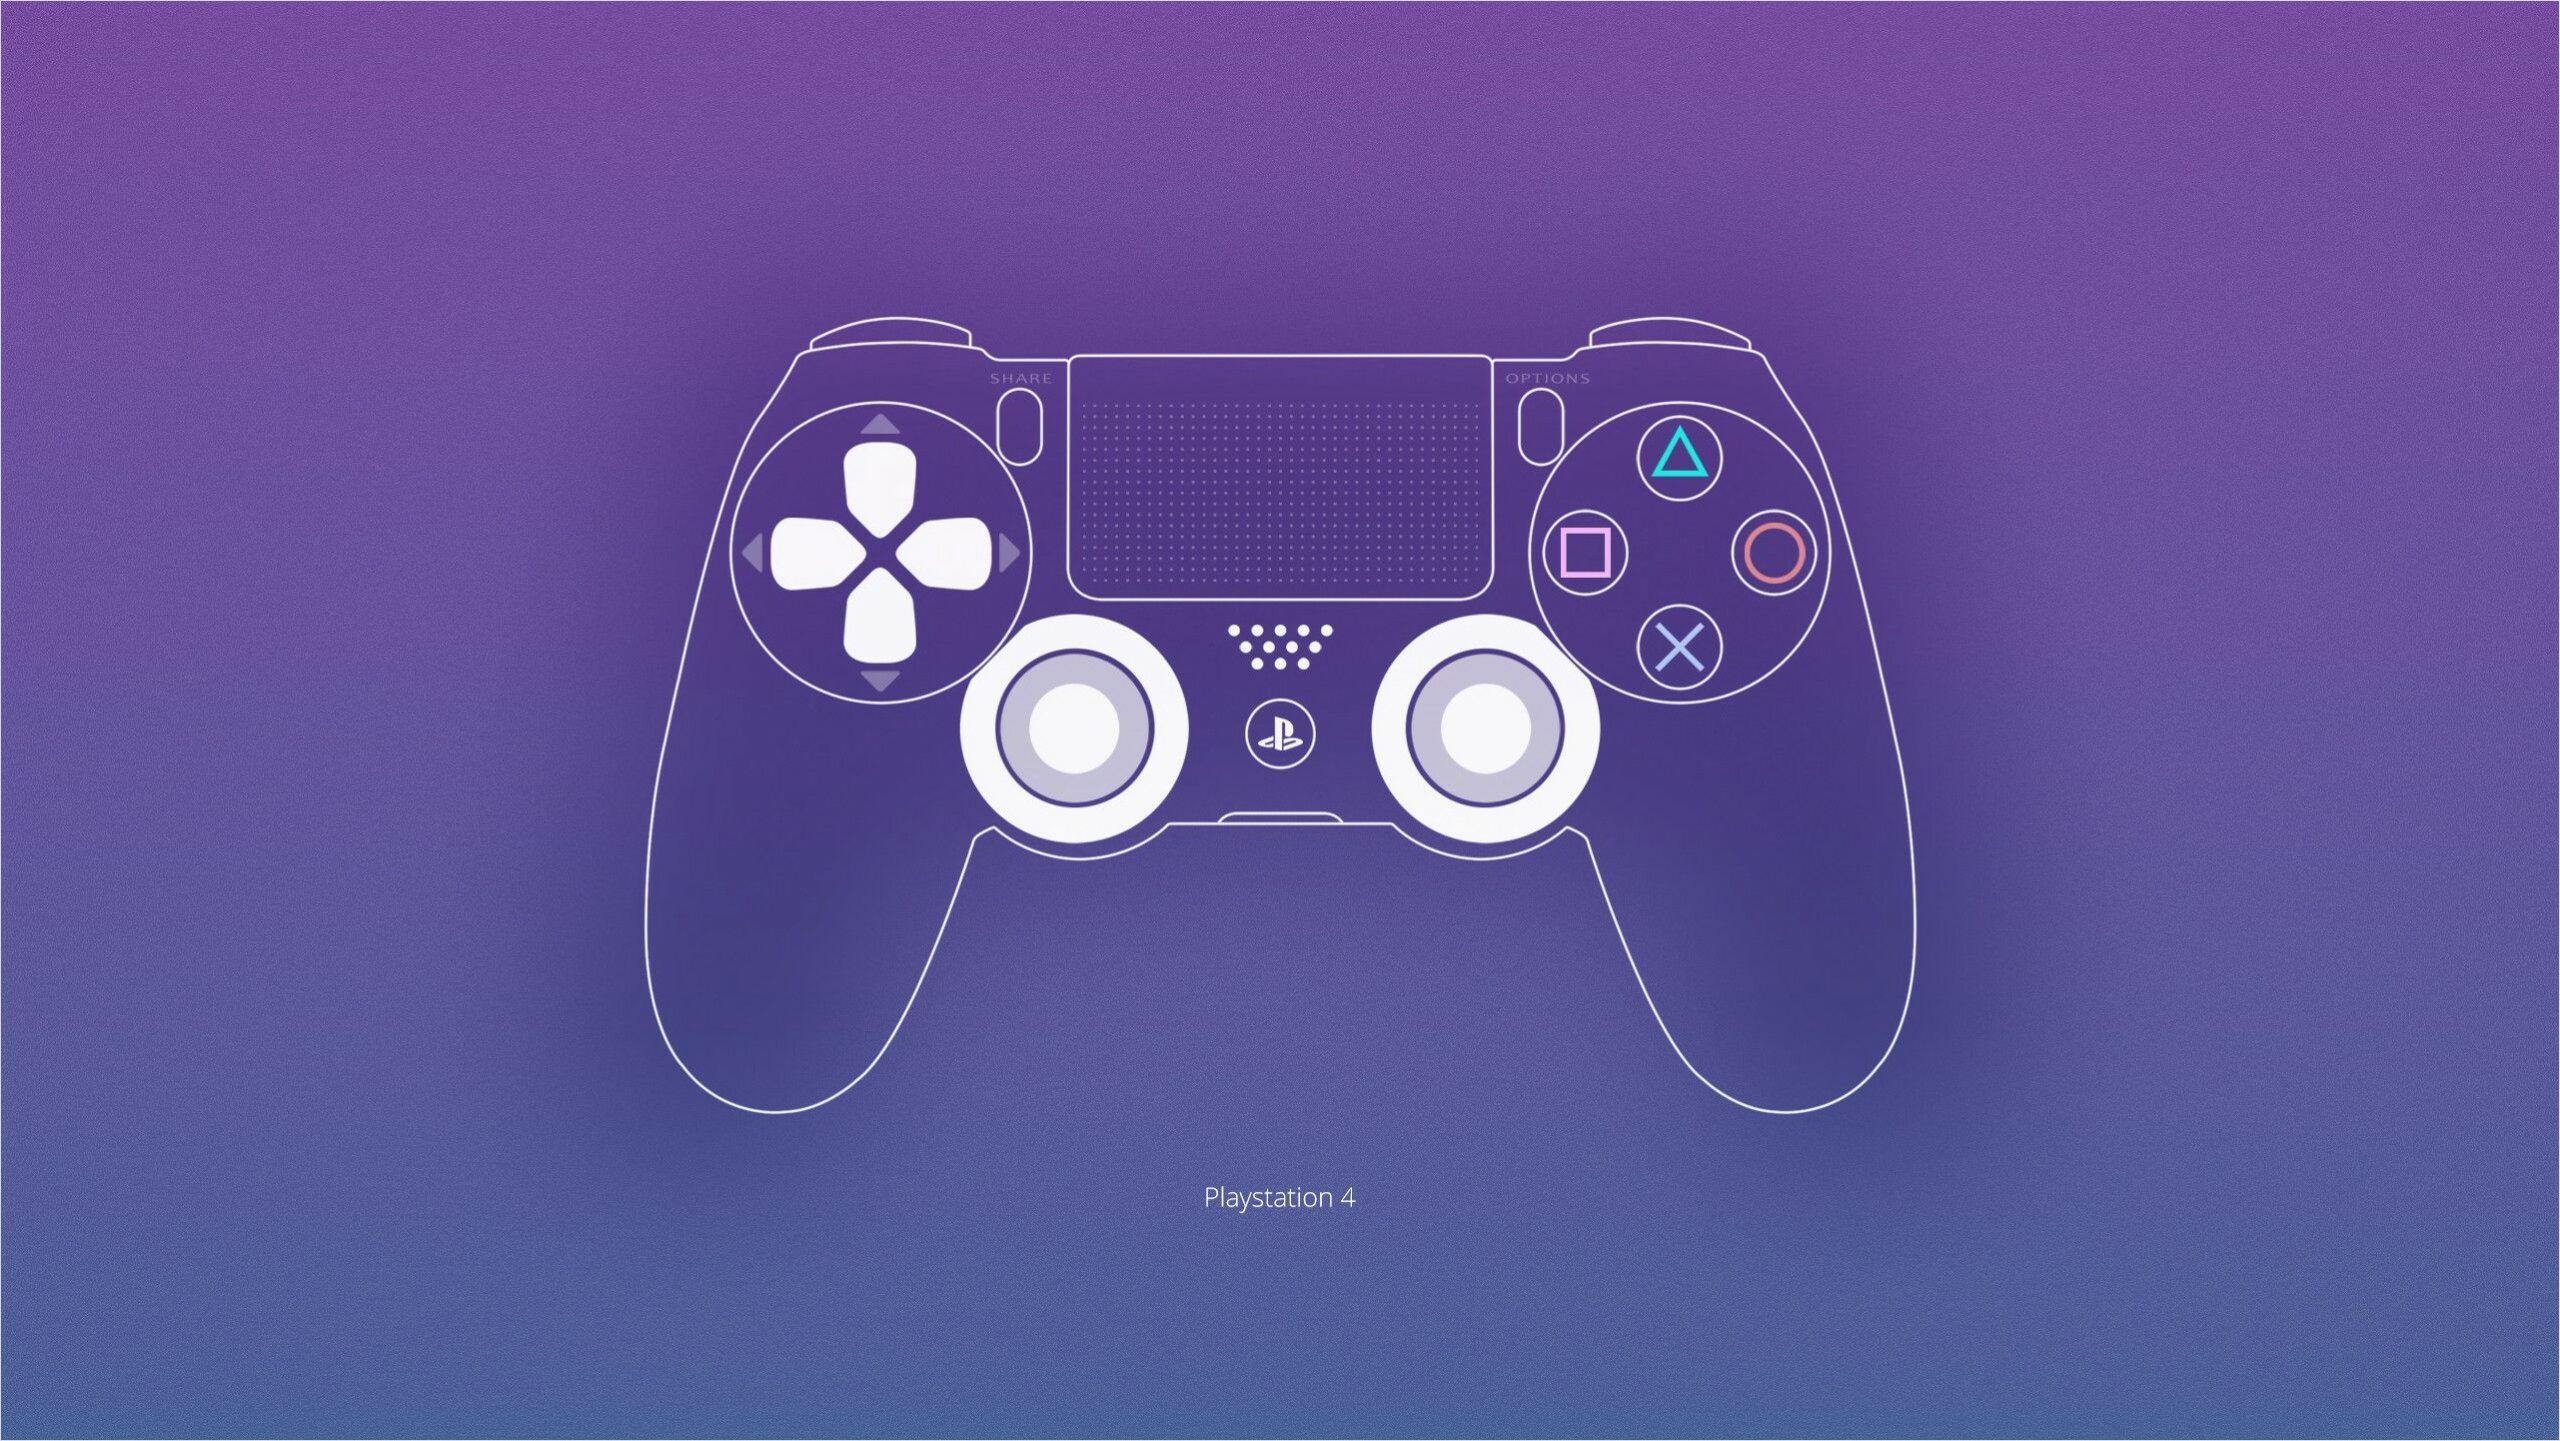 Ps4 Controller Wallpaper 4k. Ps4 games, Video game